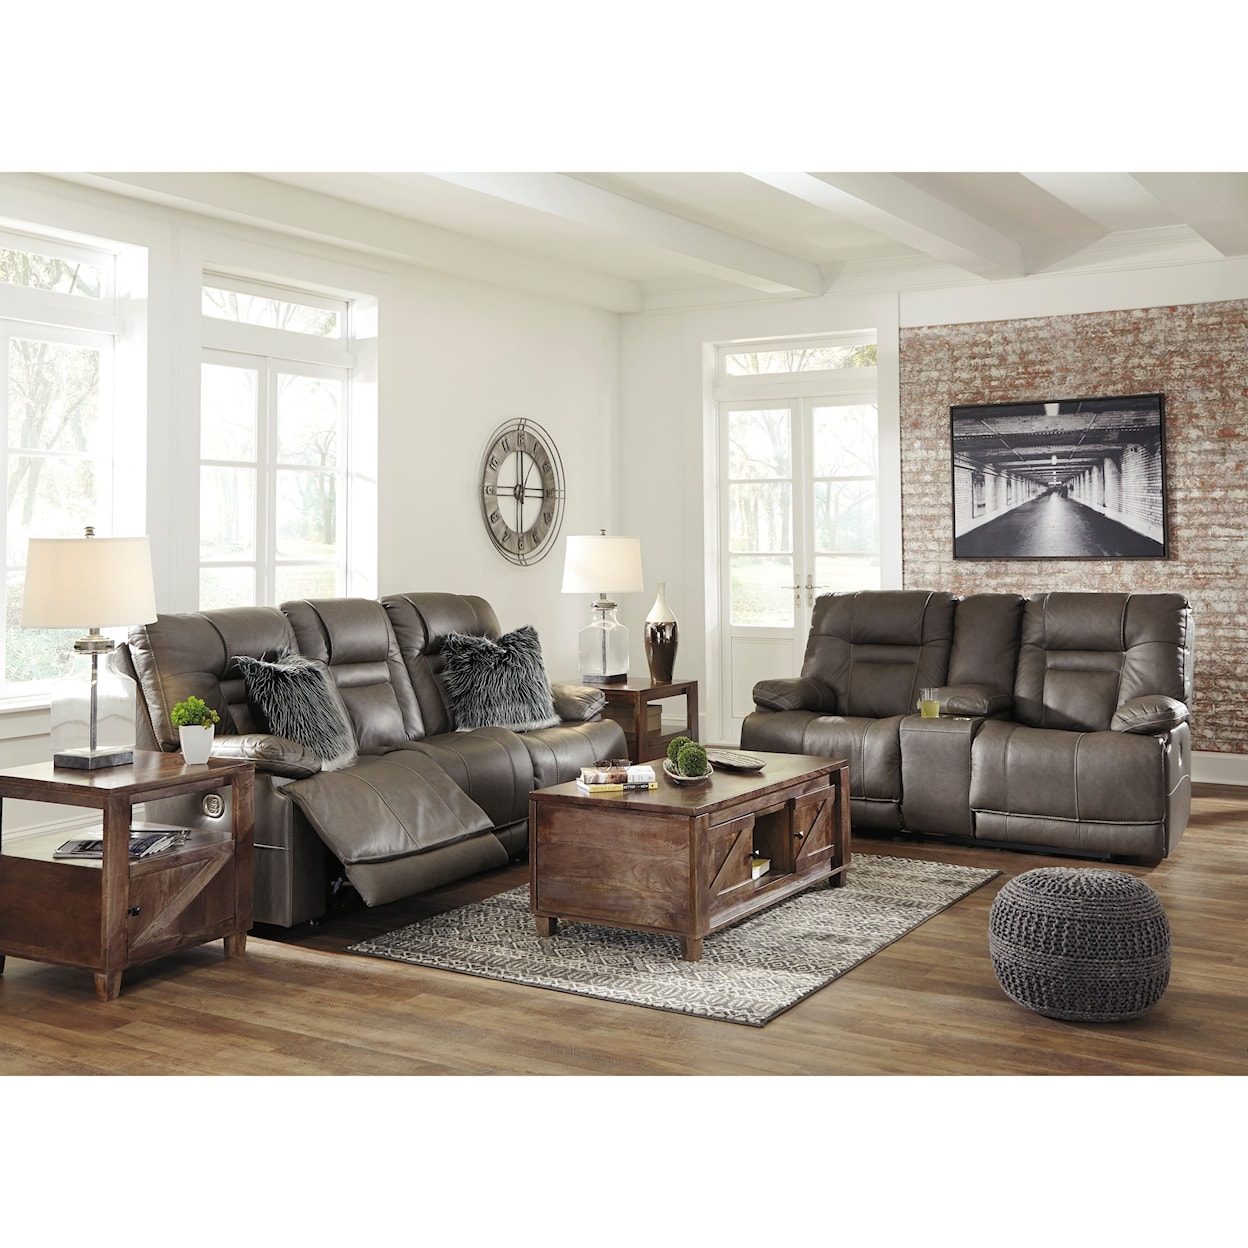 Benchcraft Wurstrow Reclining Living Room Group